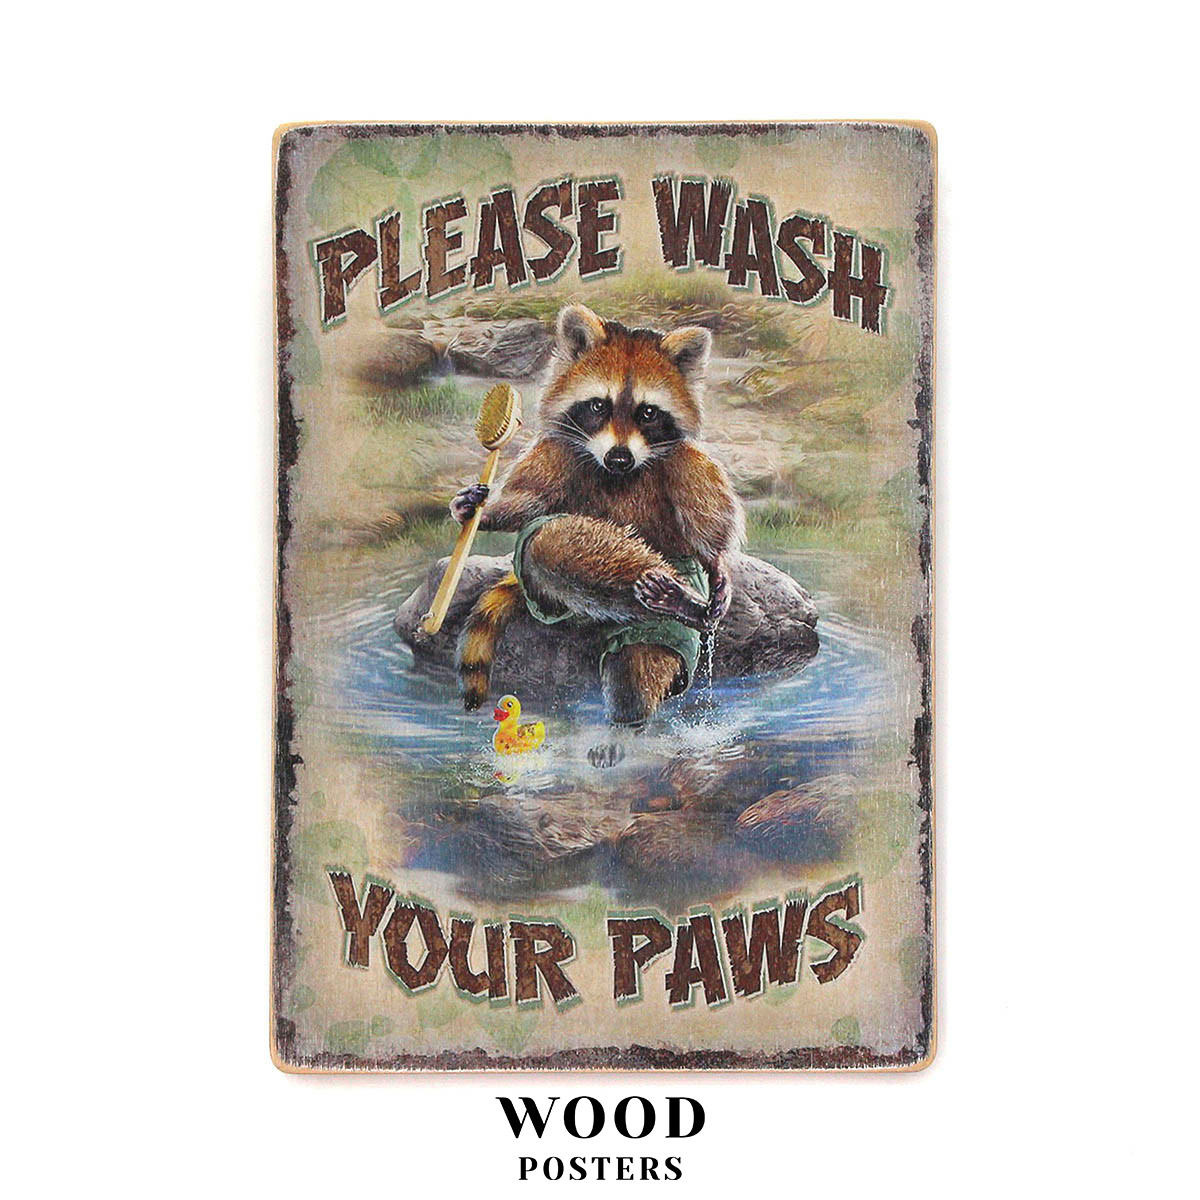 Please wash your paws